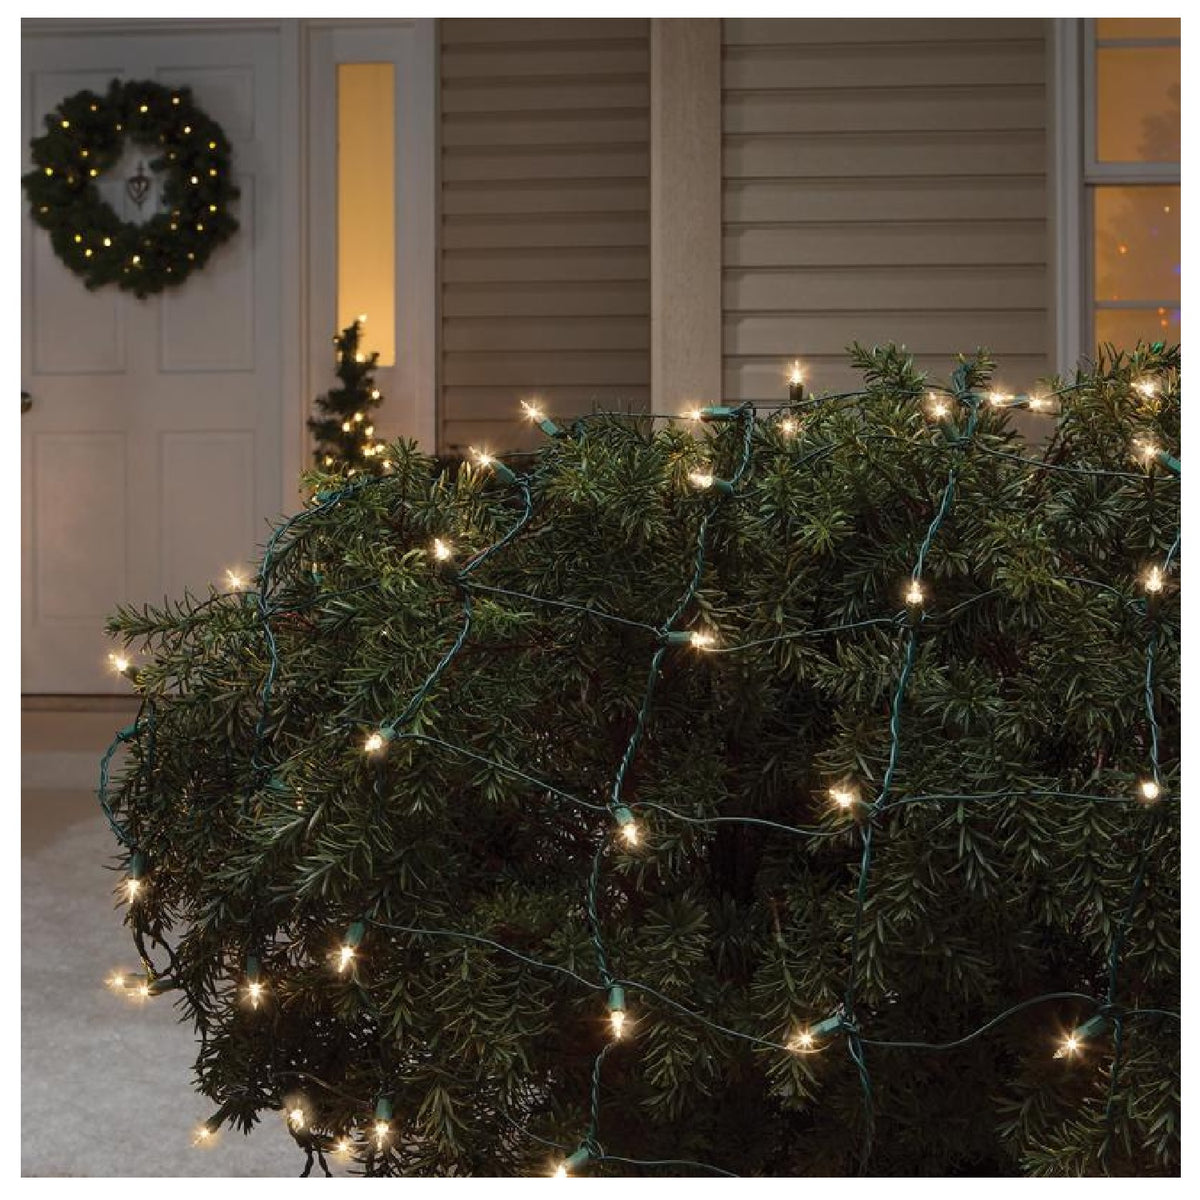 Celebrations 48950-71 Commercial Net Lights, 4' x 6', 150 Clear Lights